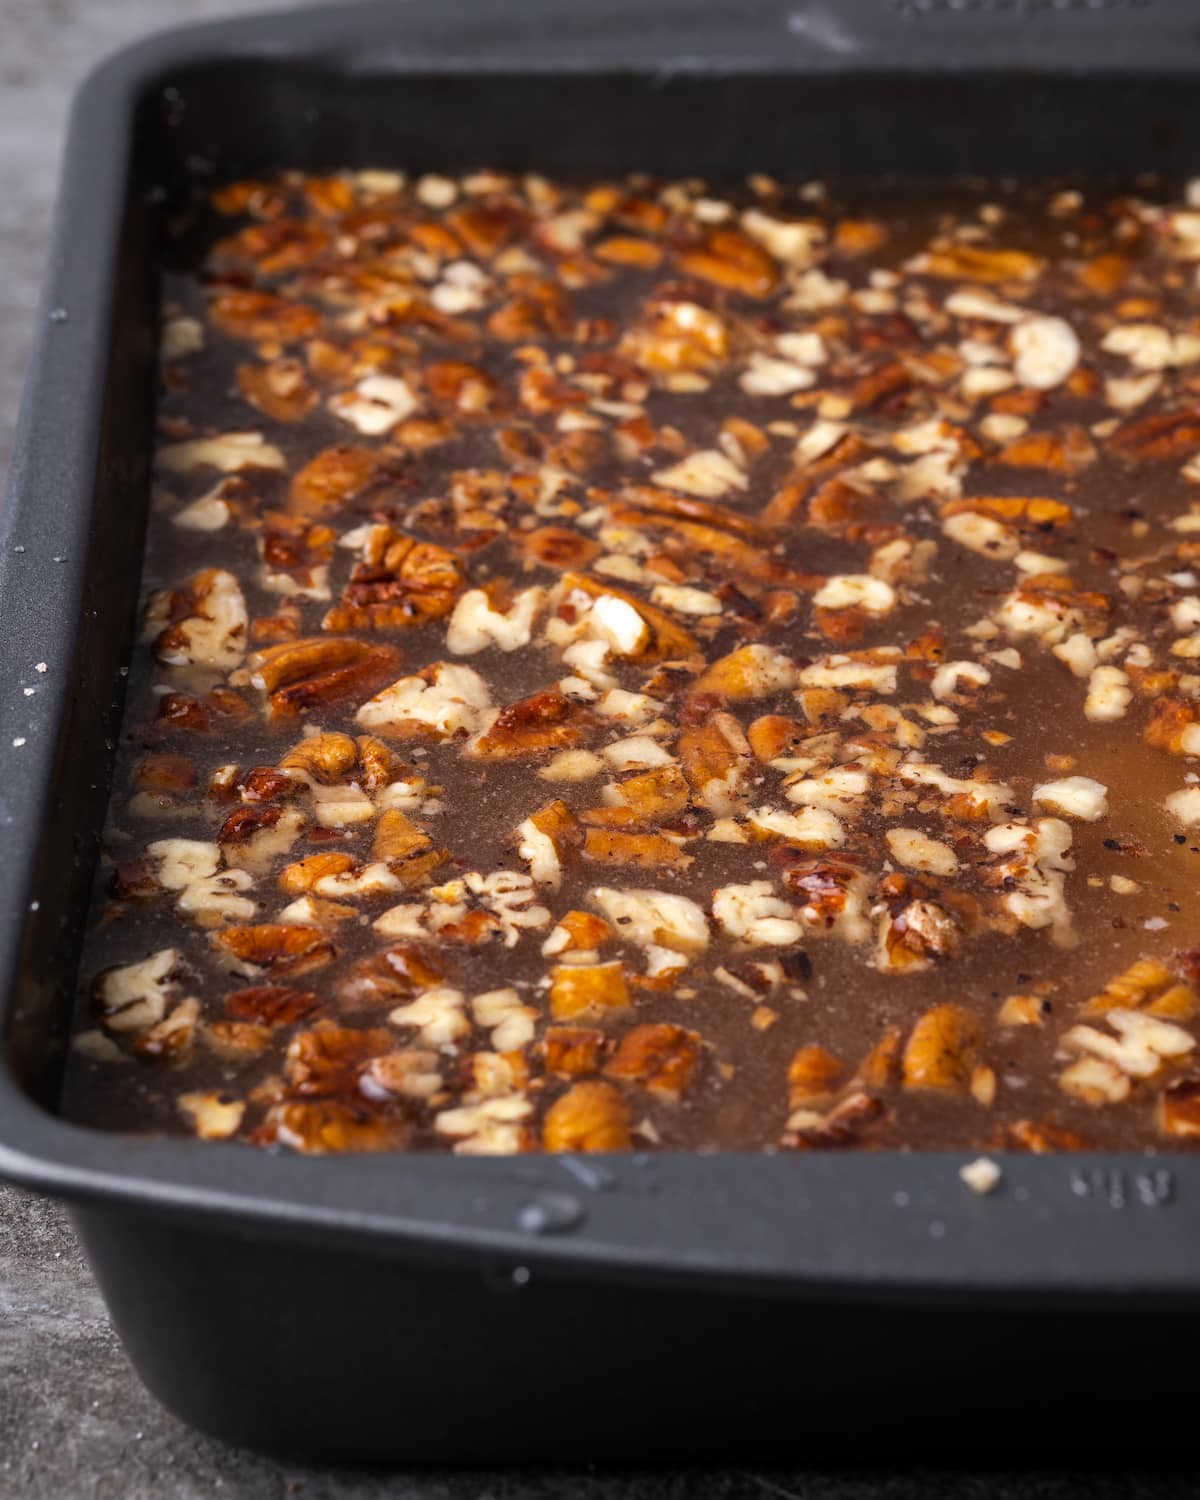 Pumpkin cobbler in a baking pan topped with toasted pecans, brown sugar, and hot water before baking.